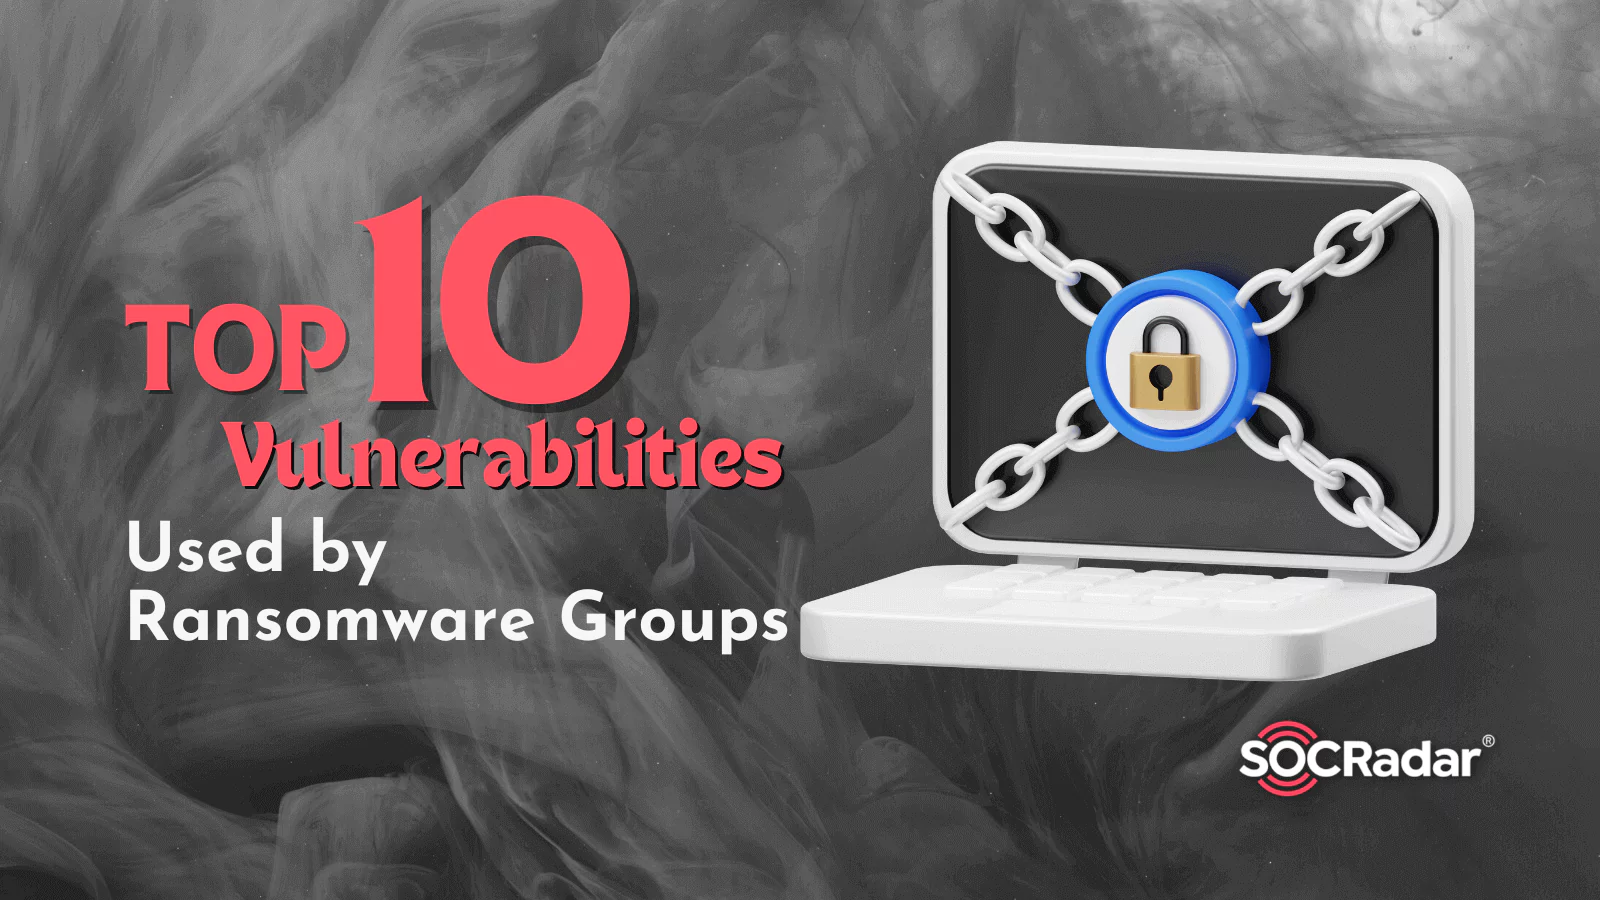 SOCRadar® Cyber Intelligence Inc. | Journey into the Top 10 Vulnerabilities Used by Ransomware Groups